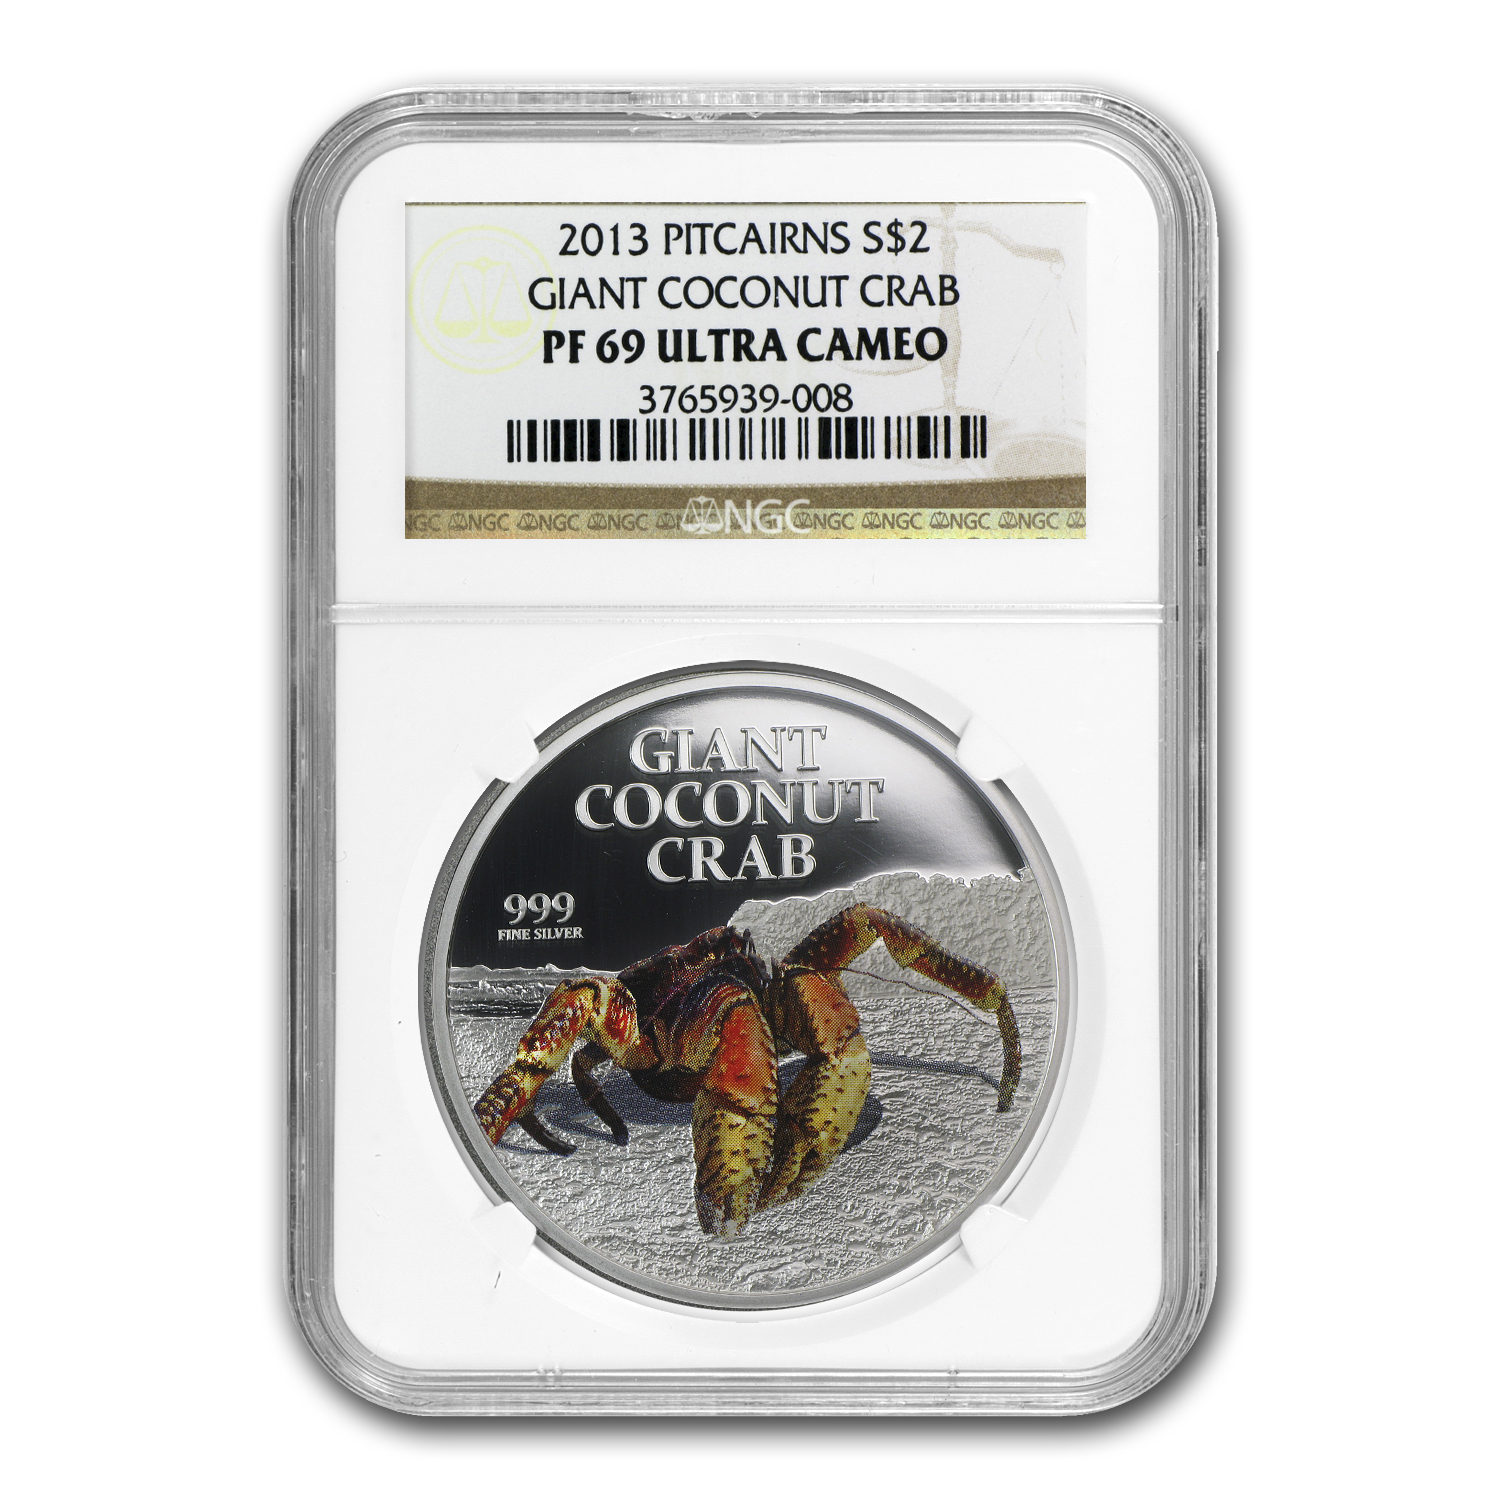 Niue 2013 2$ Giant Coconut Crab 1oz Proof Silver Coin LIMIT 5000!!! 